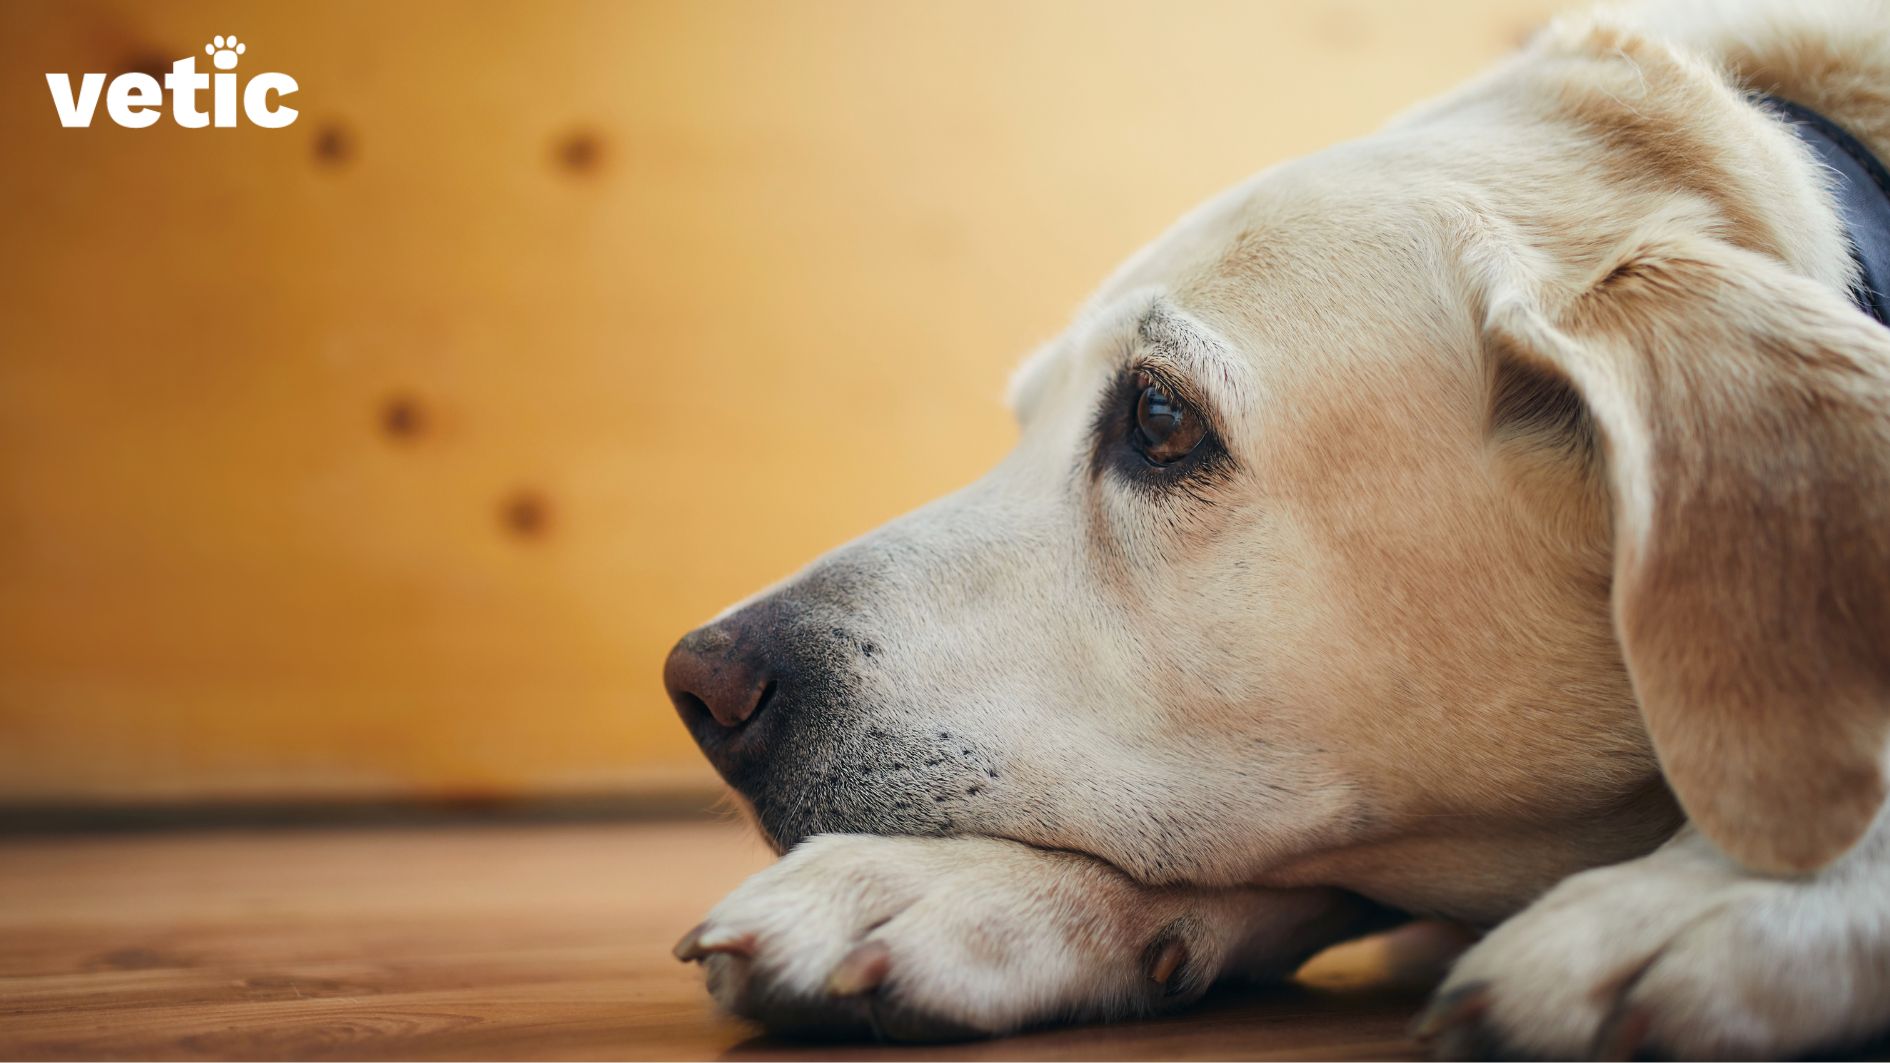 Labrador retriever, fawn in color, wearing a blue collar that's only partly visible, lying on the floor . They are resting their head on their left paw looking straight ahead. only the side profile of the dog is visible. Labrador Retrievers are highly predisposed to arthritis in dogs.